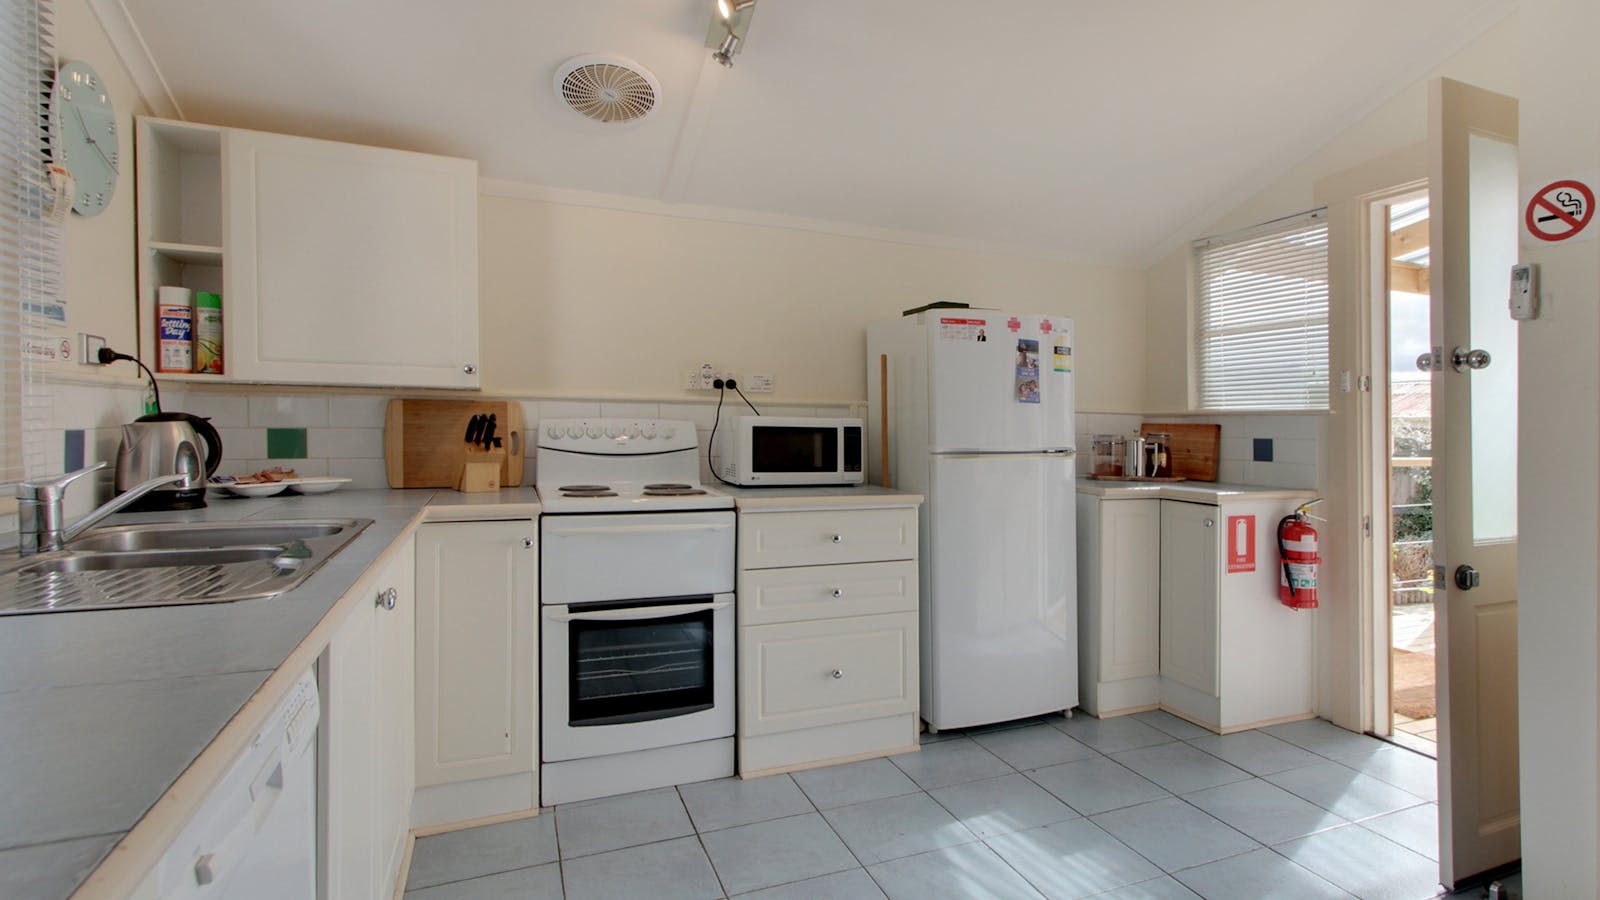 Spacious well equipped kitchen with dishwasher